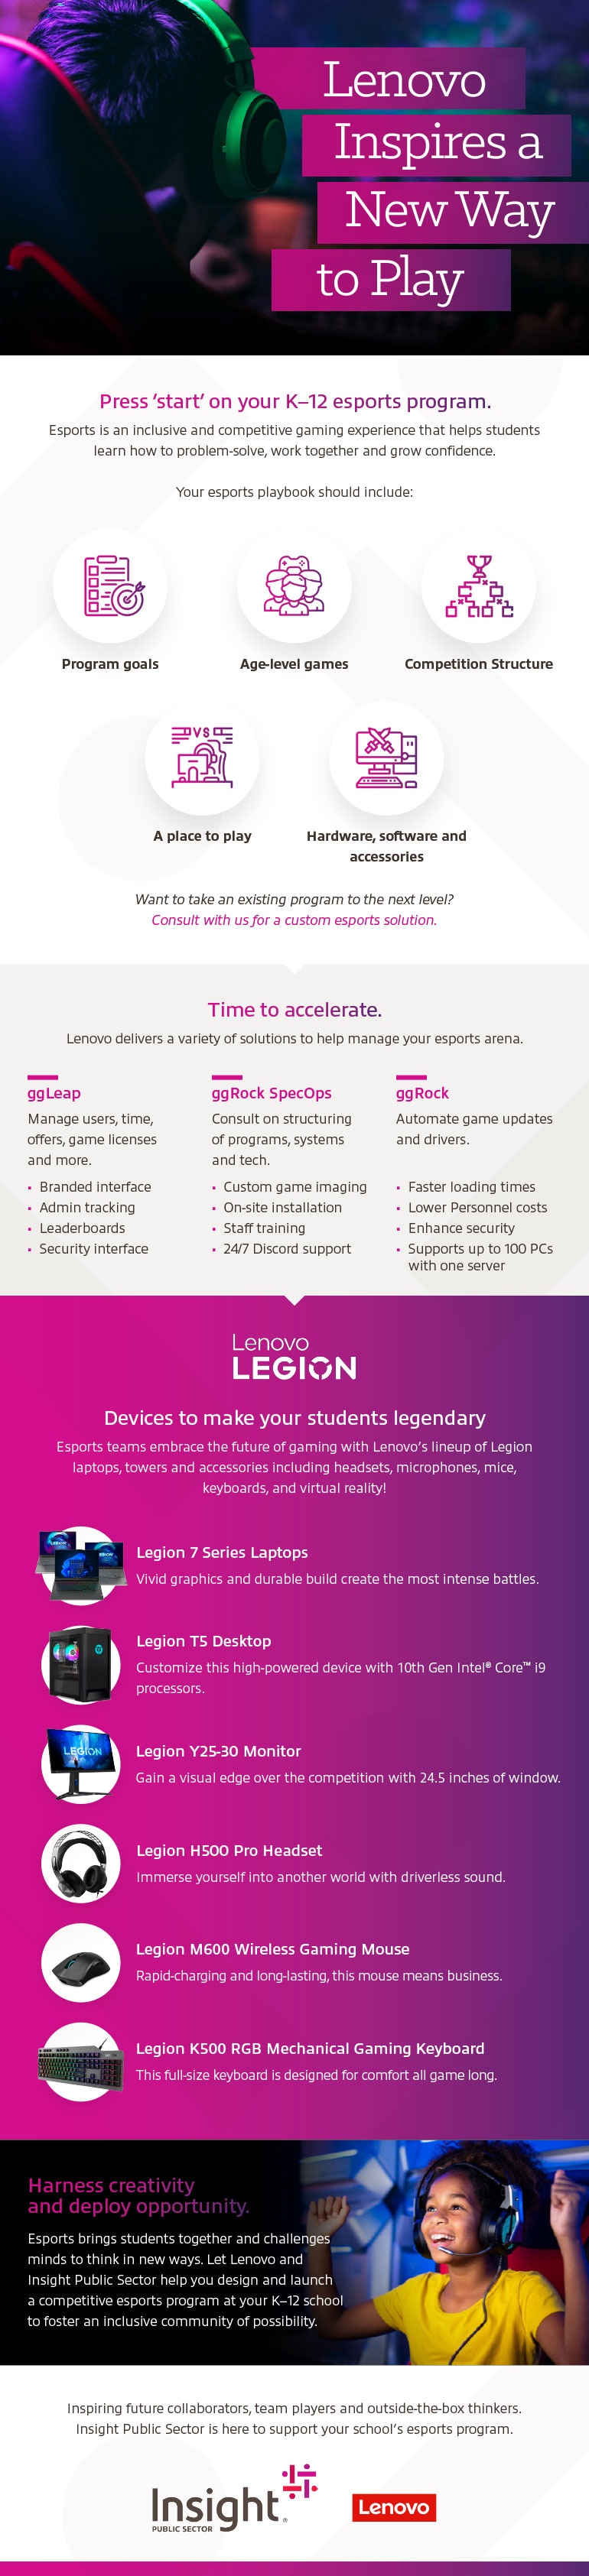 Lenovo Inspires a New Way to Play infographic as translated below.